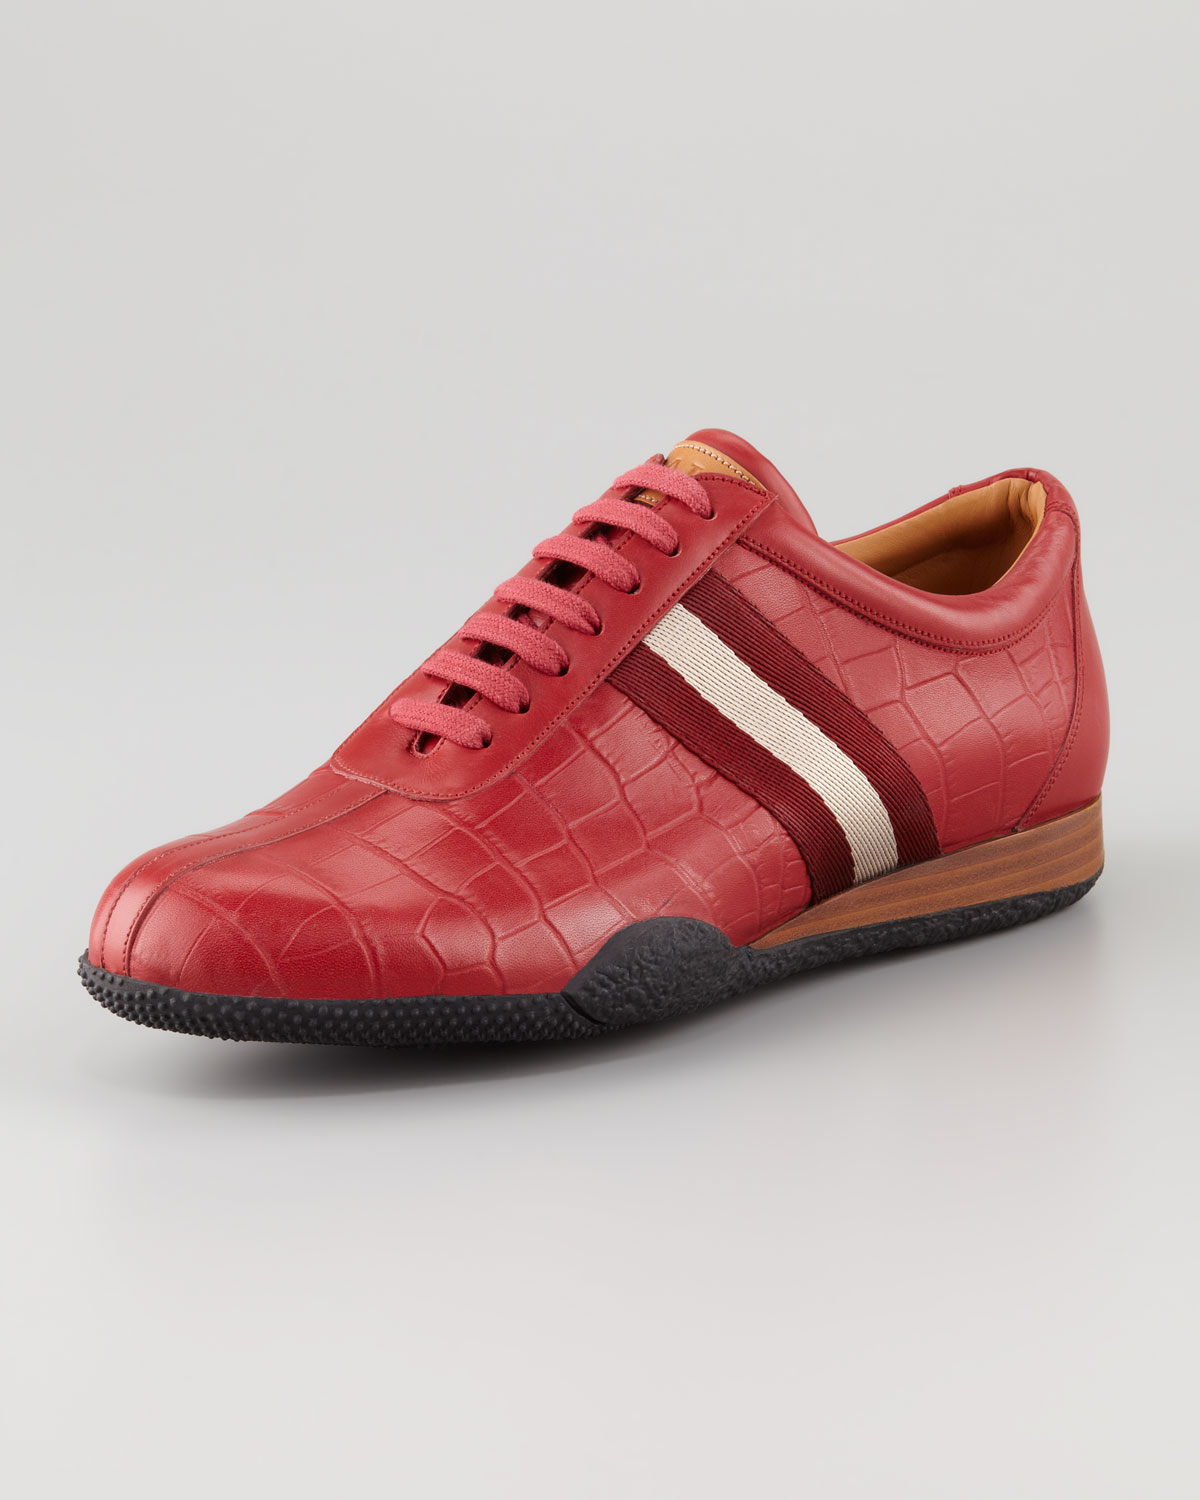 red bally sneakers